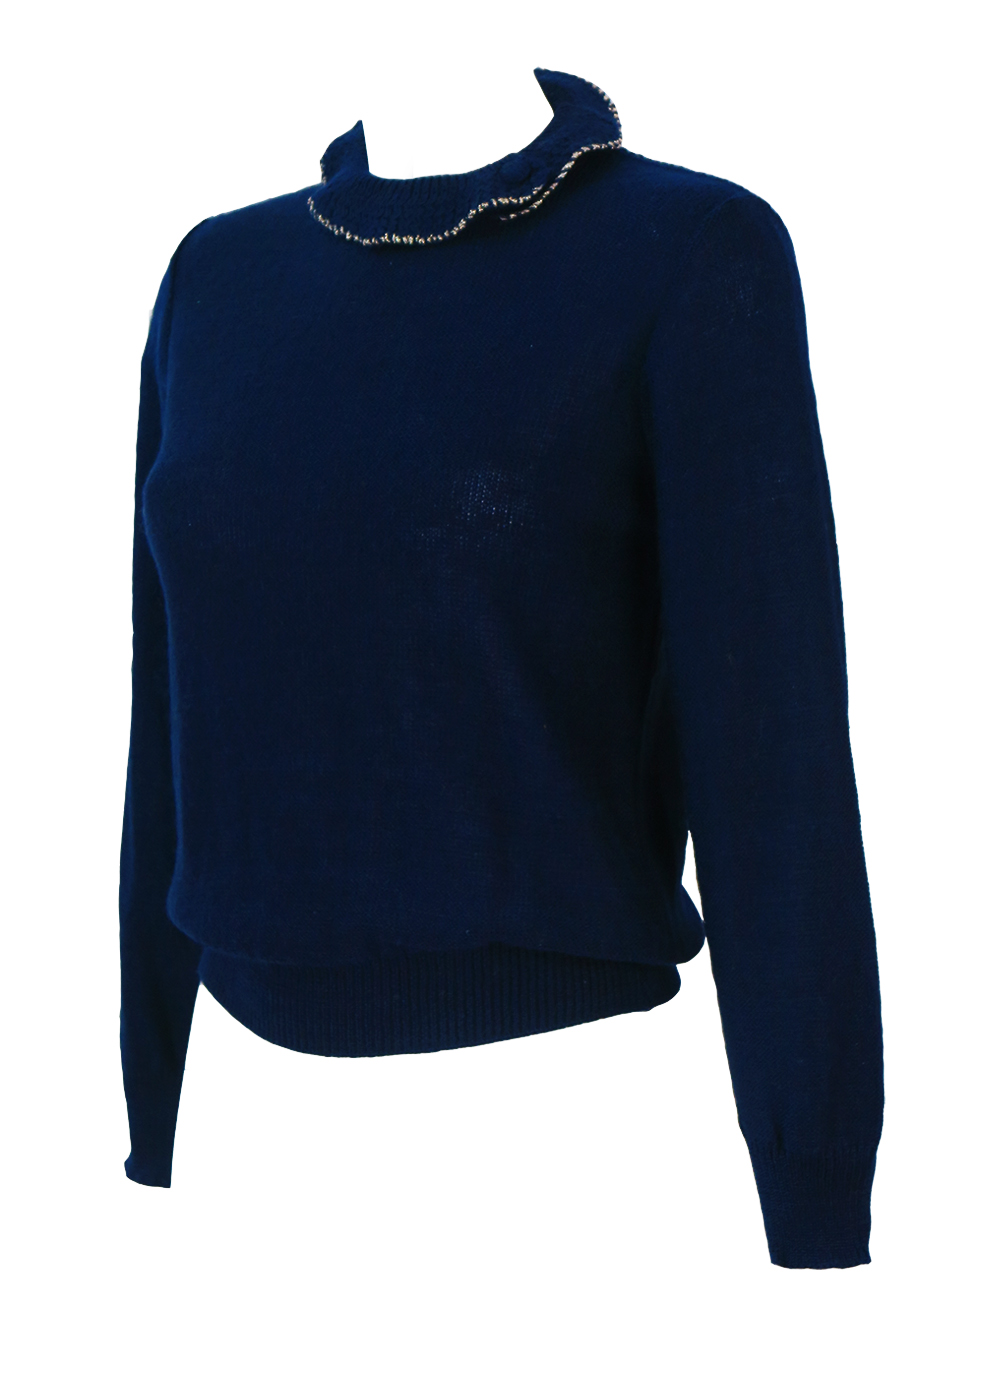 Vintage 60's Navy Blue Jumper with Gold Trim Frill Collar - New - S ...